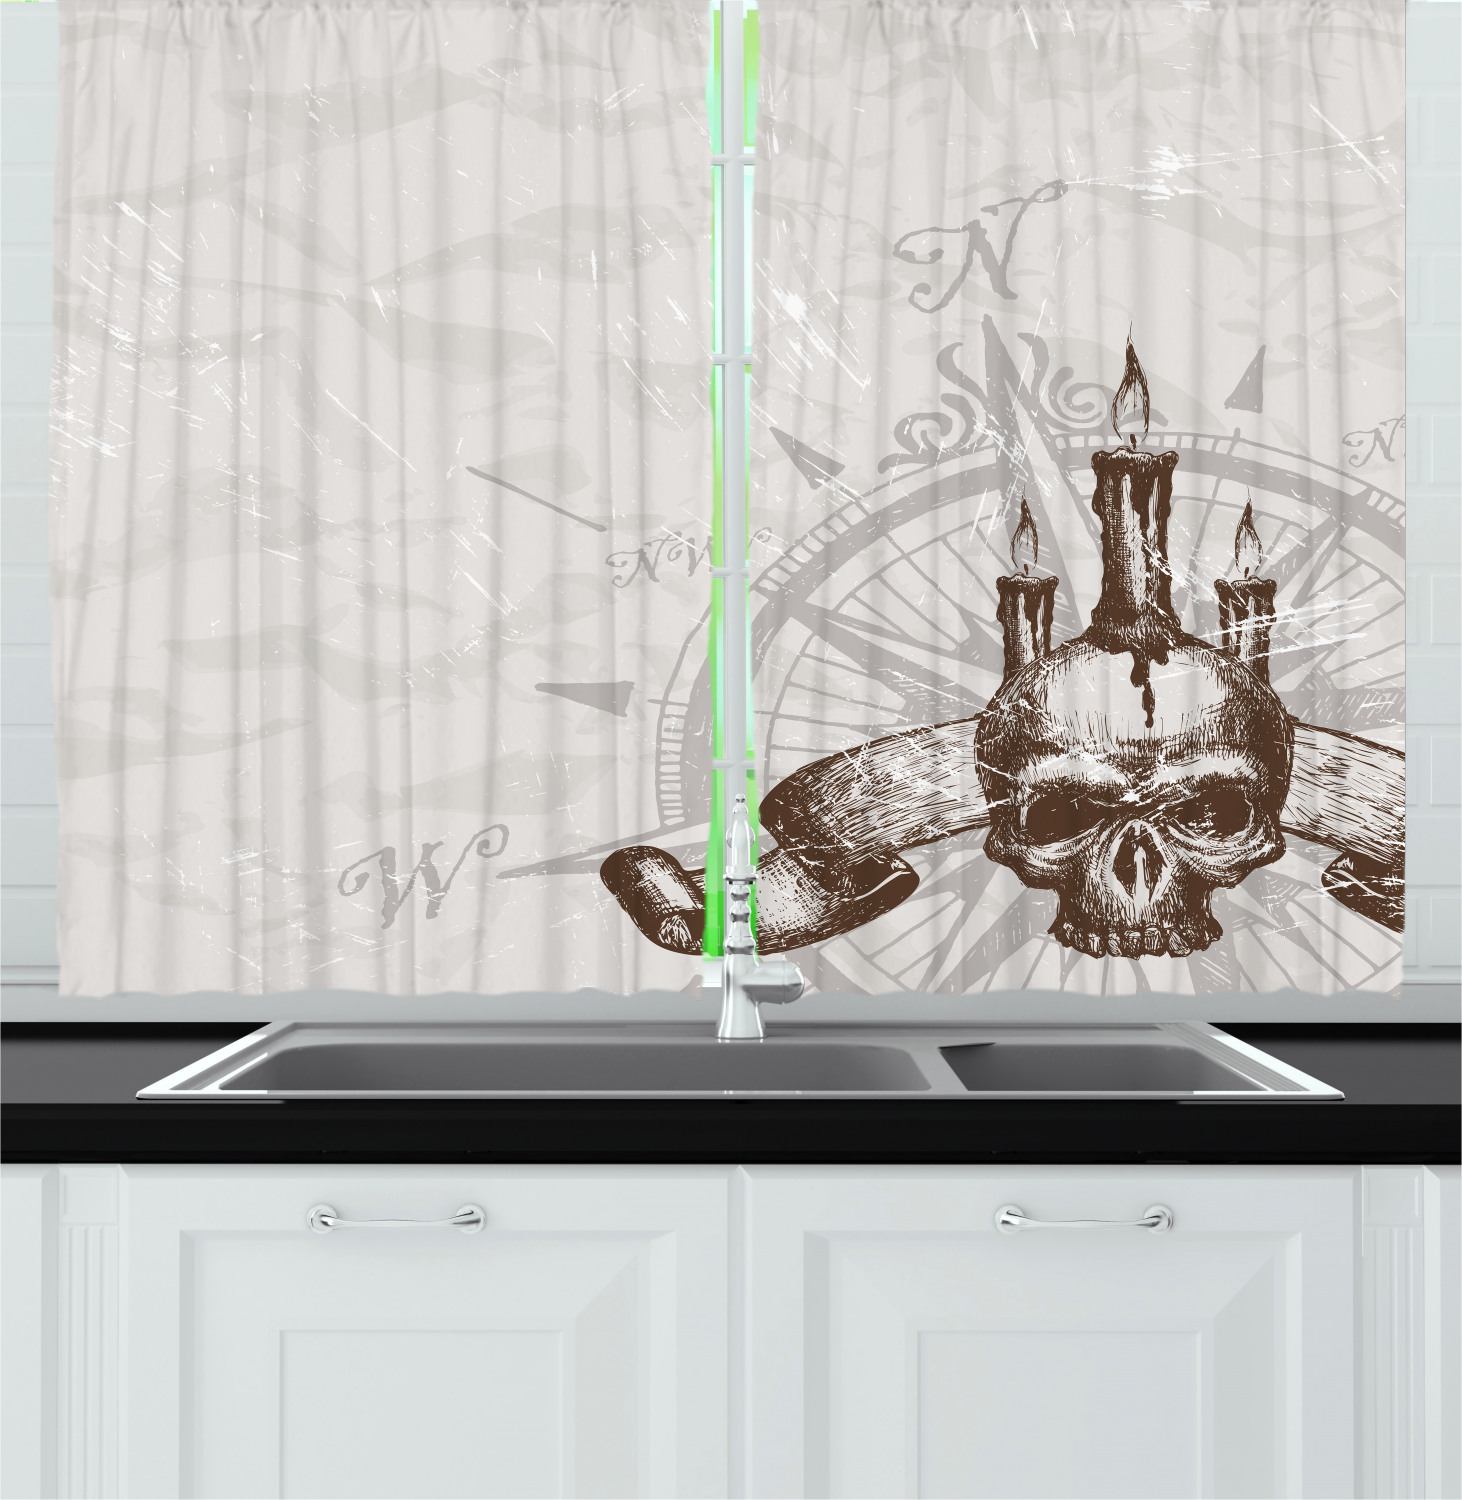 Musical Kitchen Curtains 2 Panel Set Window Drapes 55" X 39" by Ambesonne 